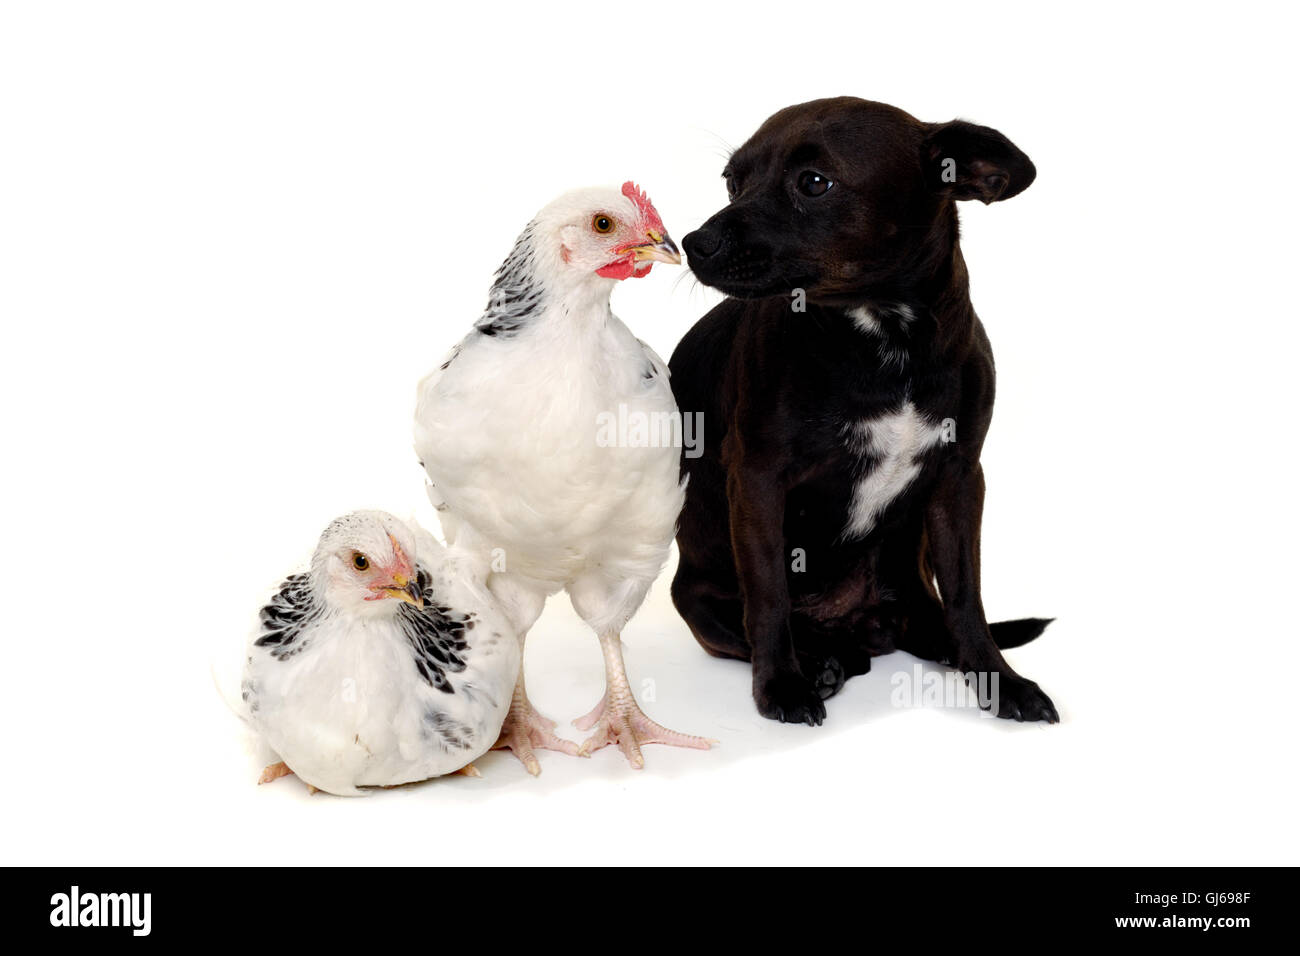 Puppy dog and chickens Stock Photo